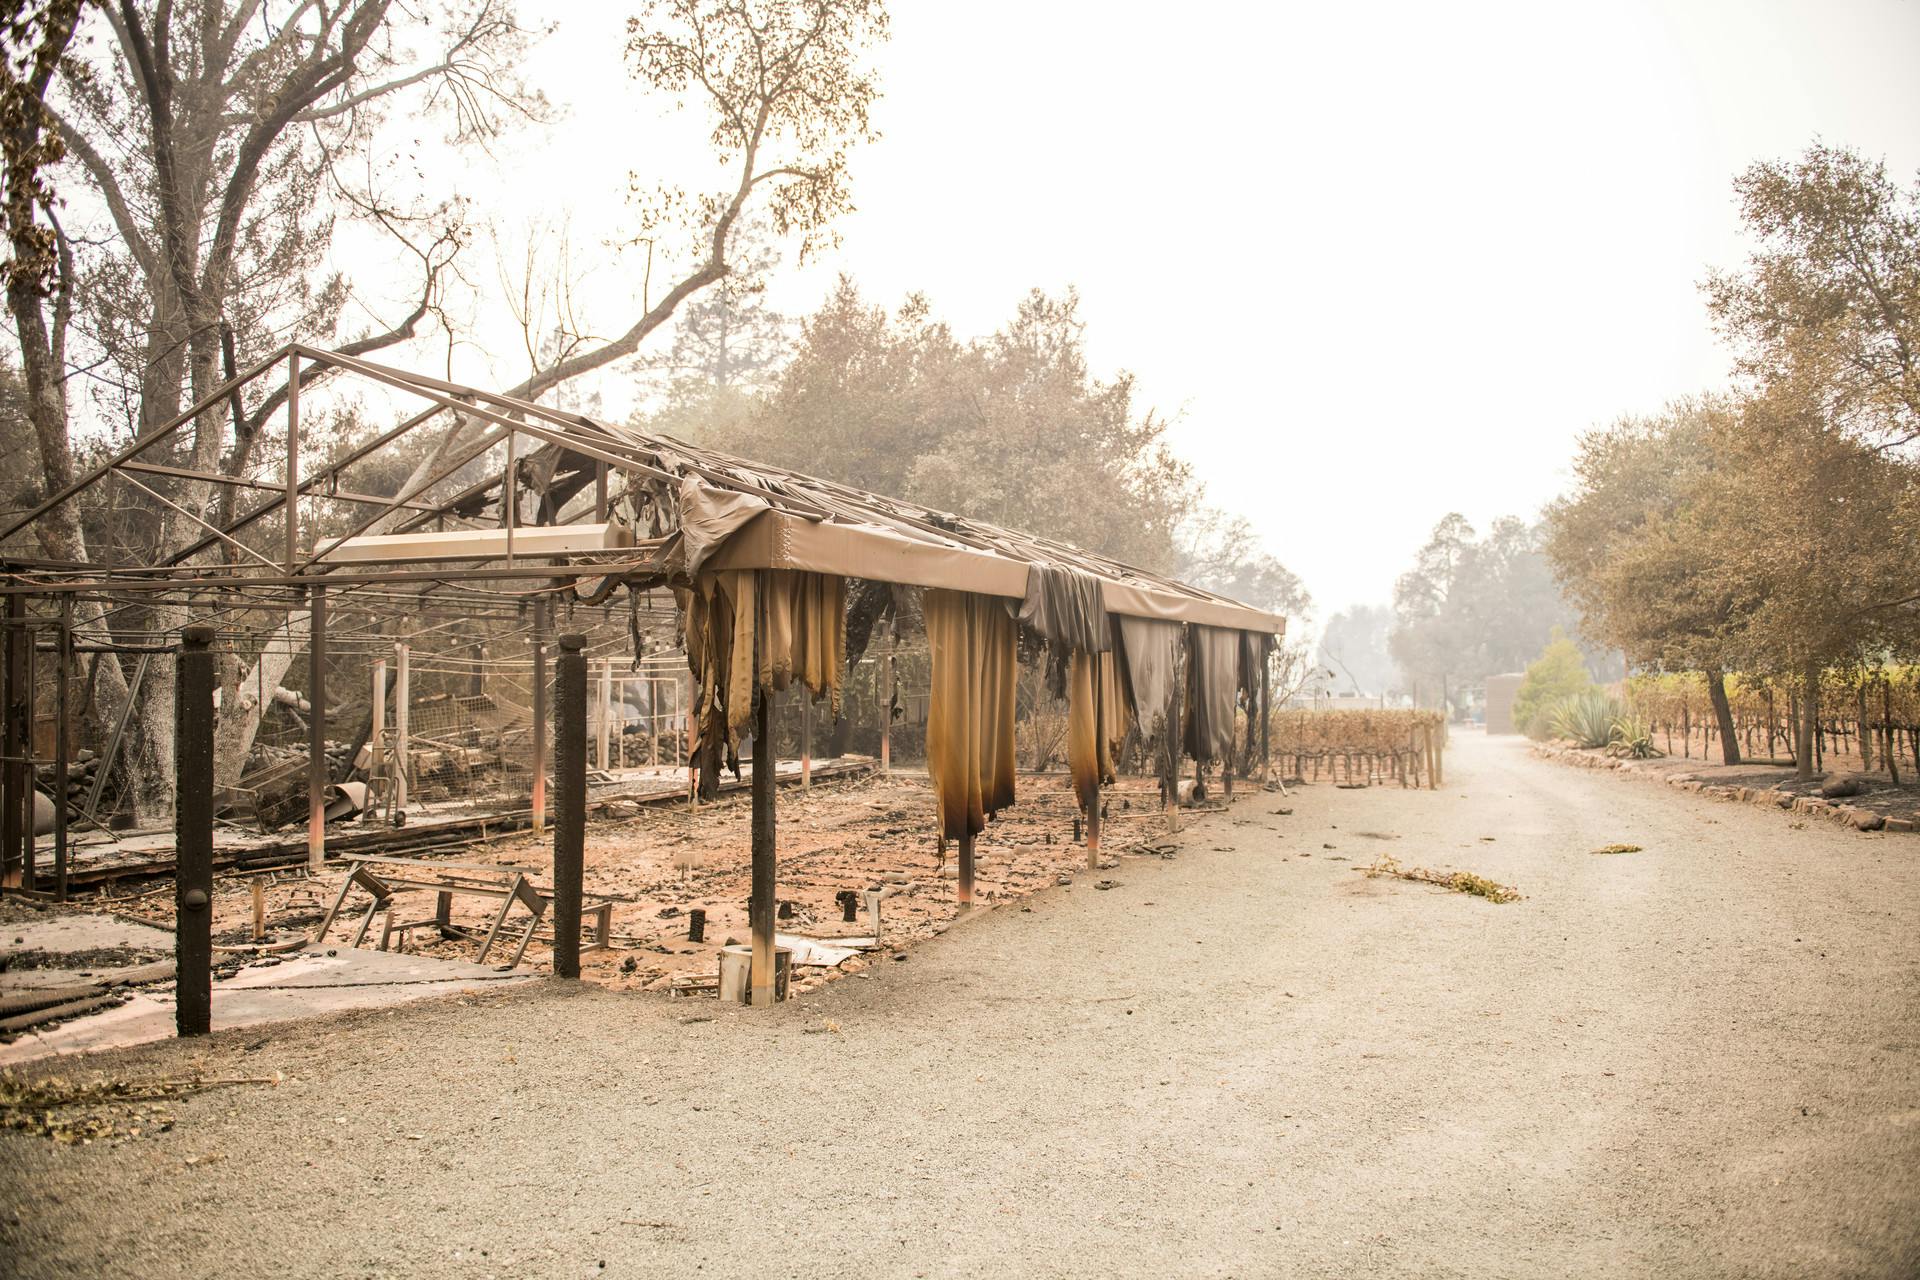 The North Bay Journalist Providing Vital Fire Information for Her Neighbors